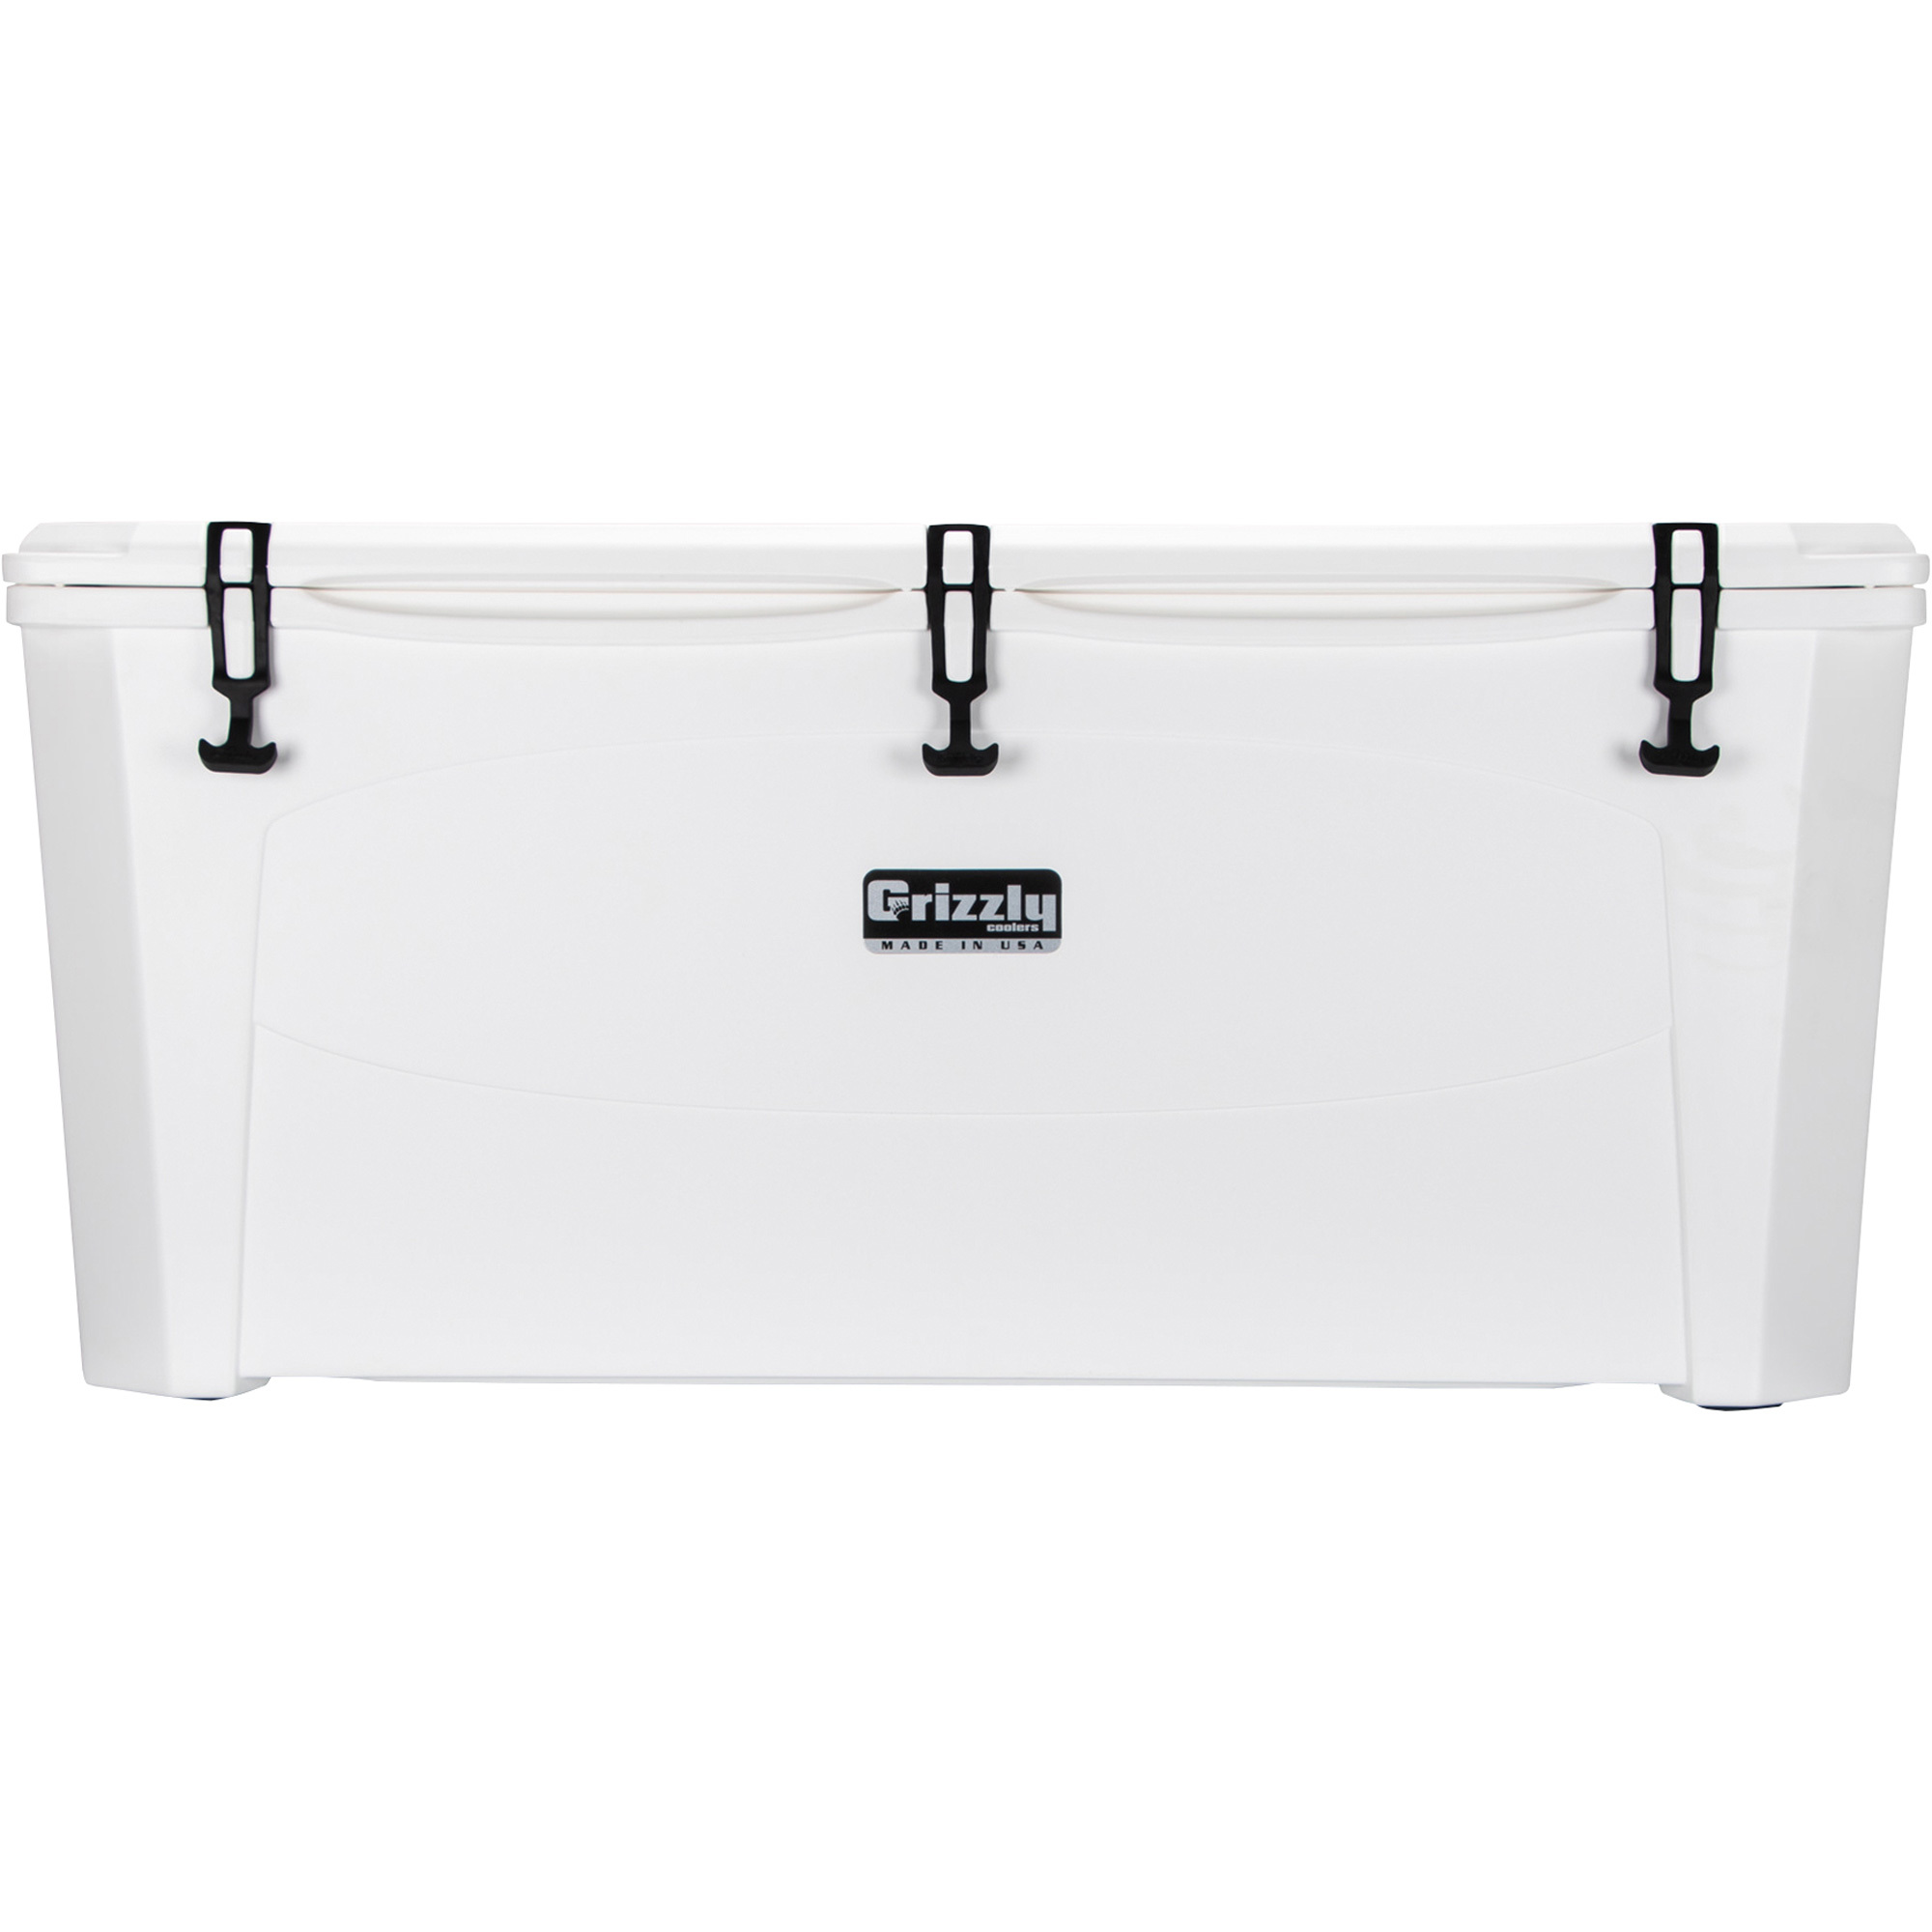 Grizzly Coolers 400799